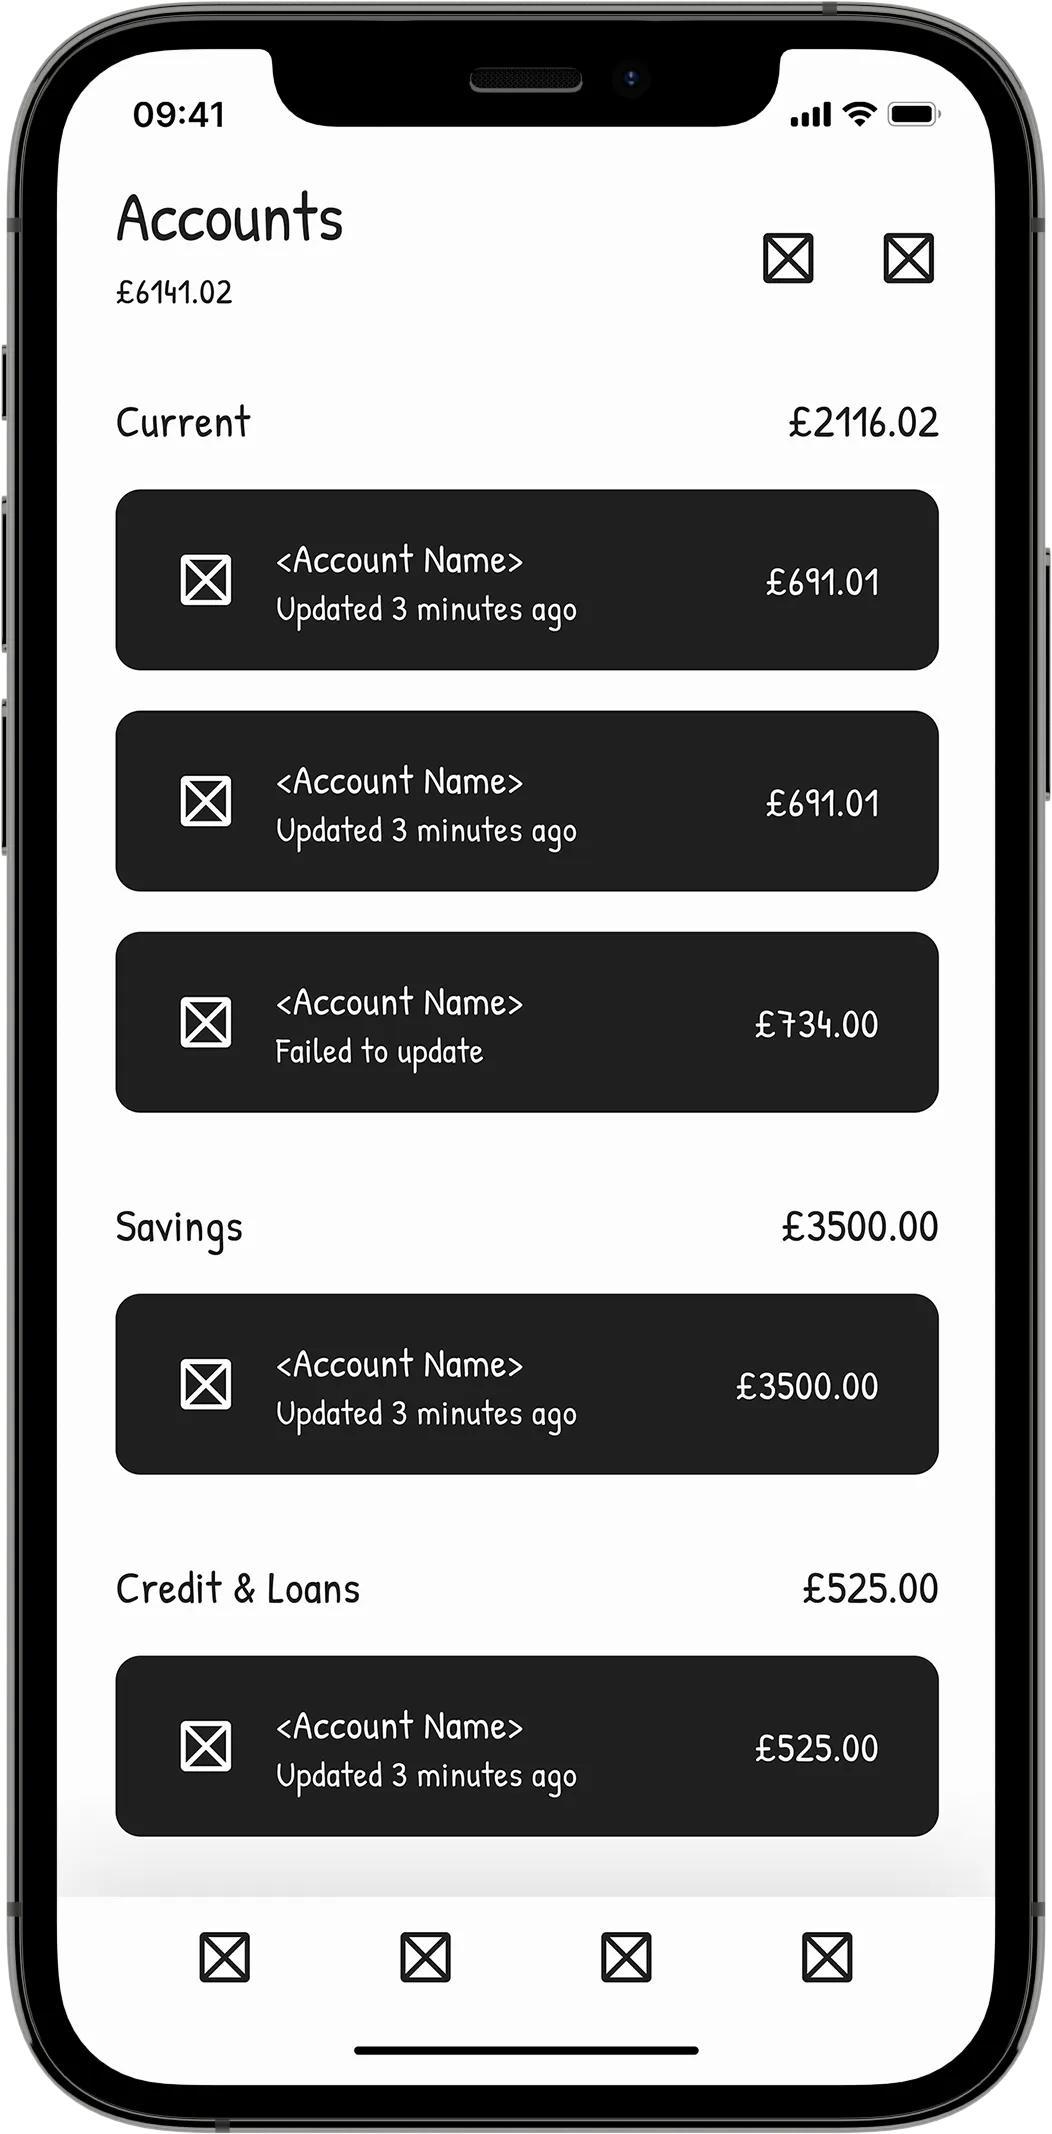 A mobile wireframe showing an "Accounts" screen containing tab bar navigation and informational bank account cards.